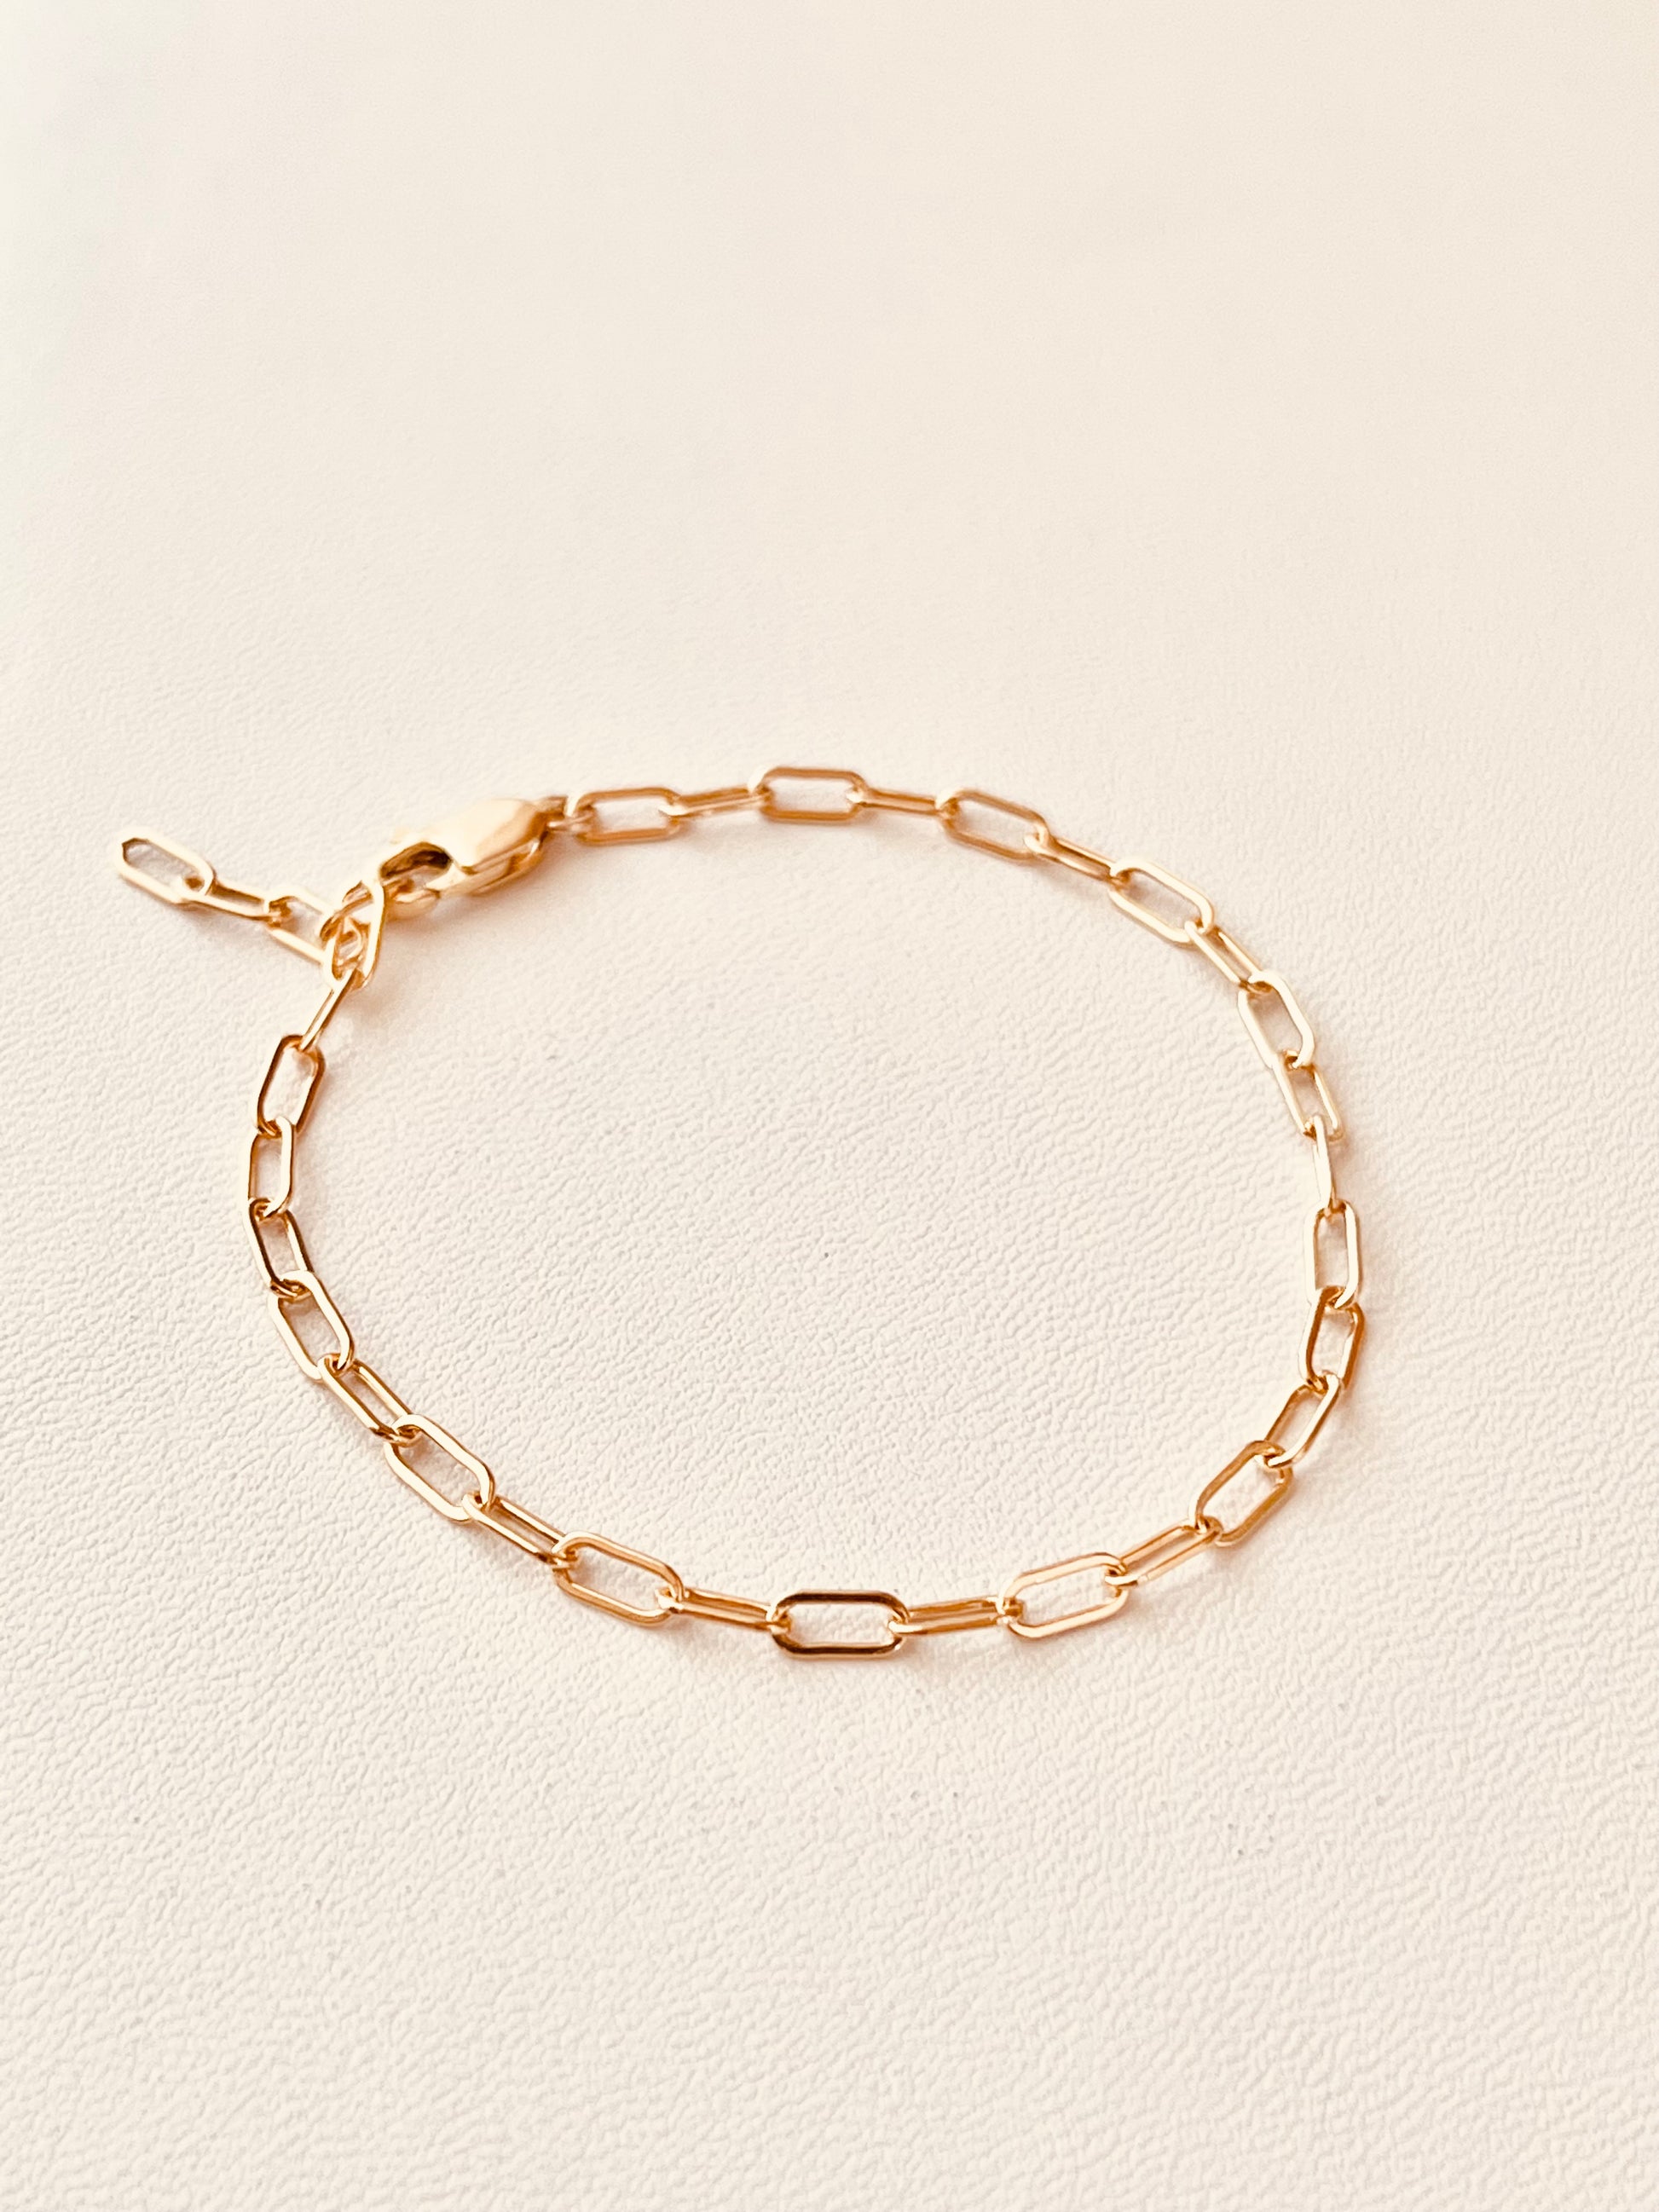 Paperclip Chain Bracelet, Link Bracelet, Everyday Bracelet, Bridesmaid Jewelry, Timeless Bracelet, Mothers Gift, Gift For Her, THICK LINK CHAIN, Dainty and simple